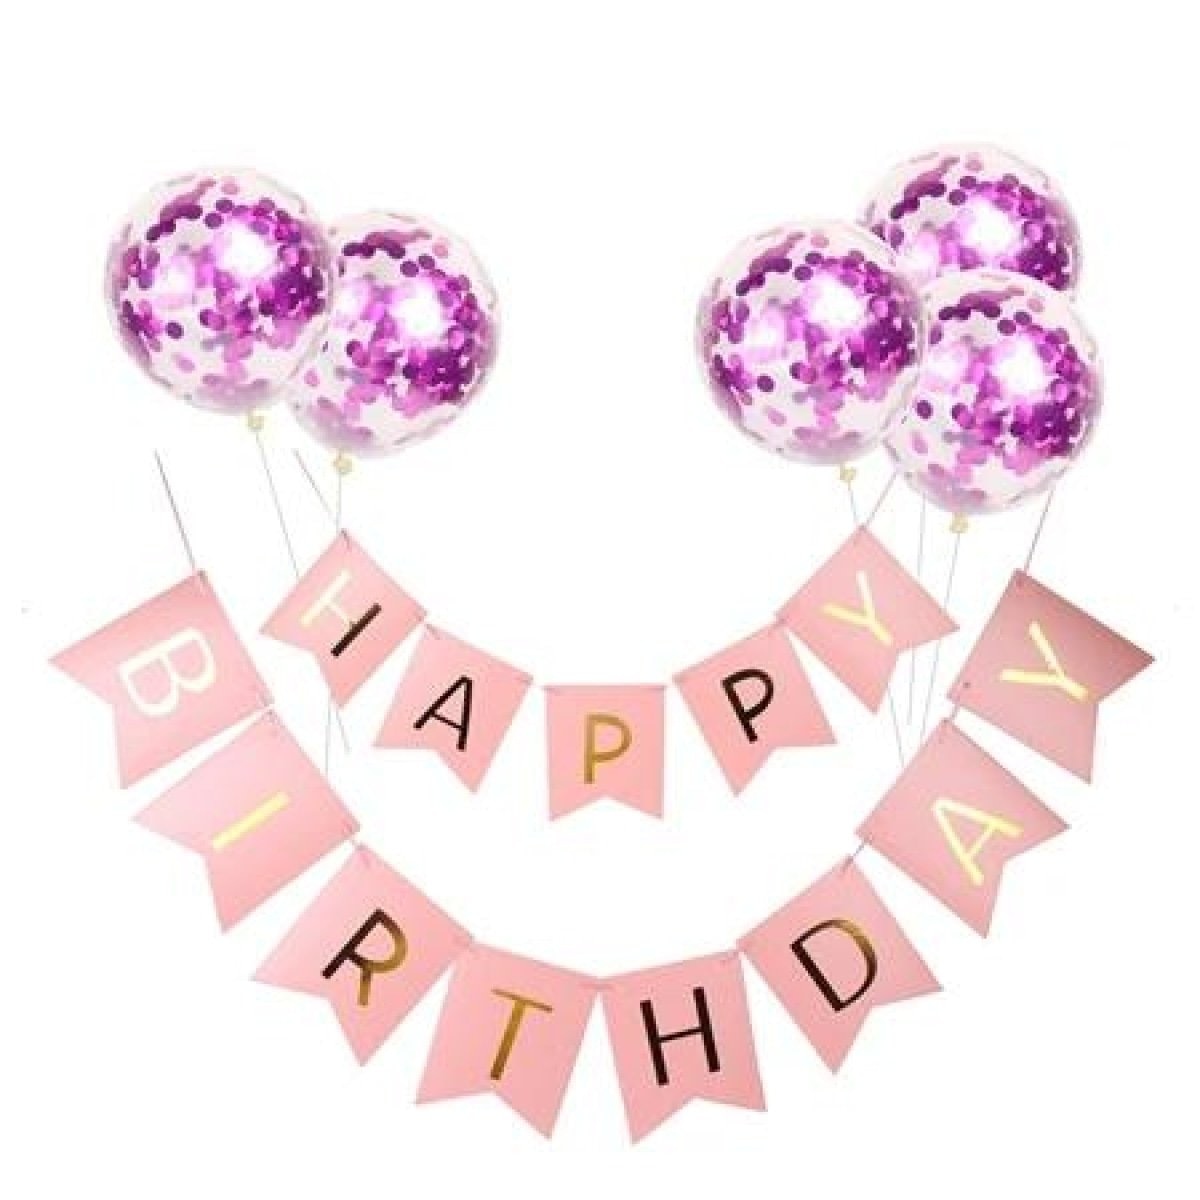 Happy Birthday Balloon Banner Set Confetti Balloons Party Decorations Boy Girl | F | Asia Sell